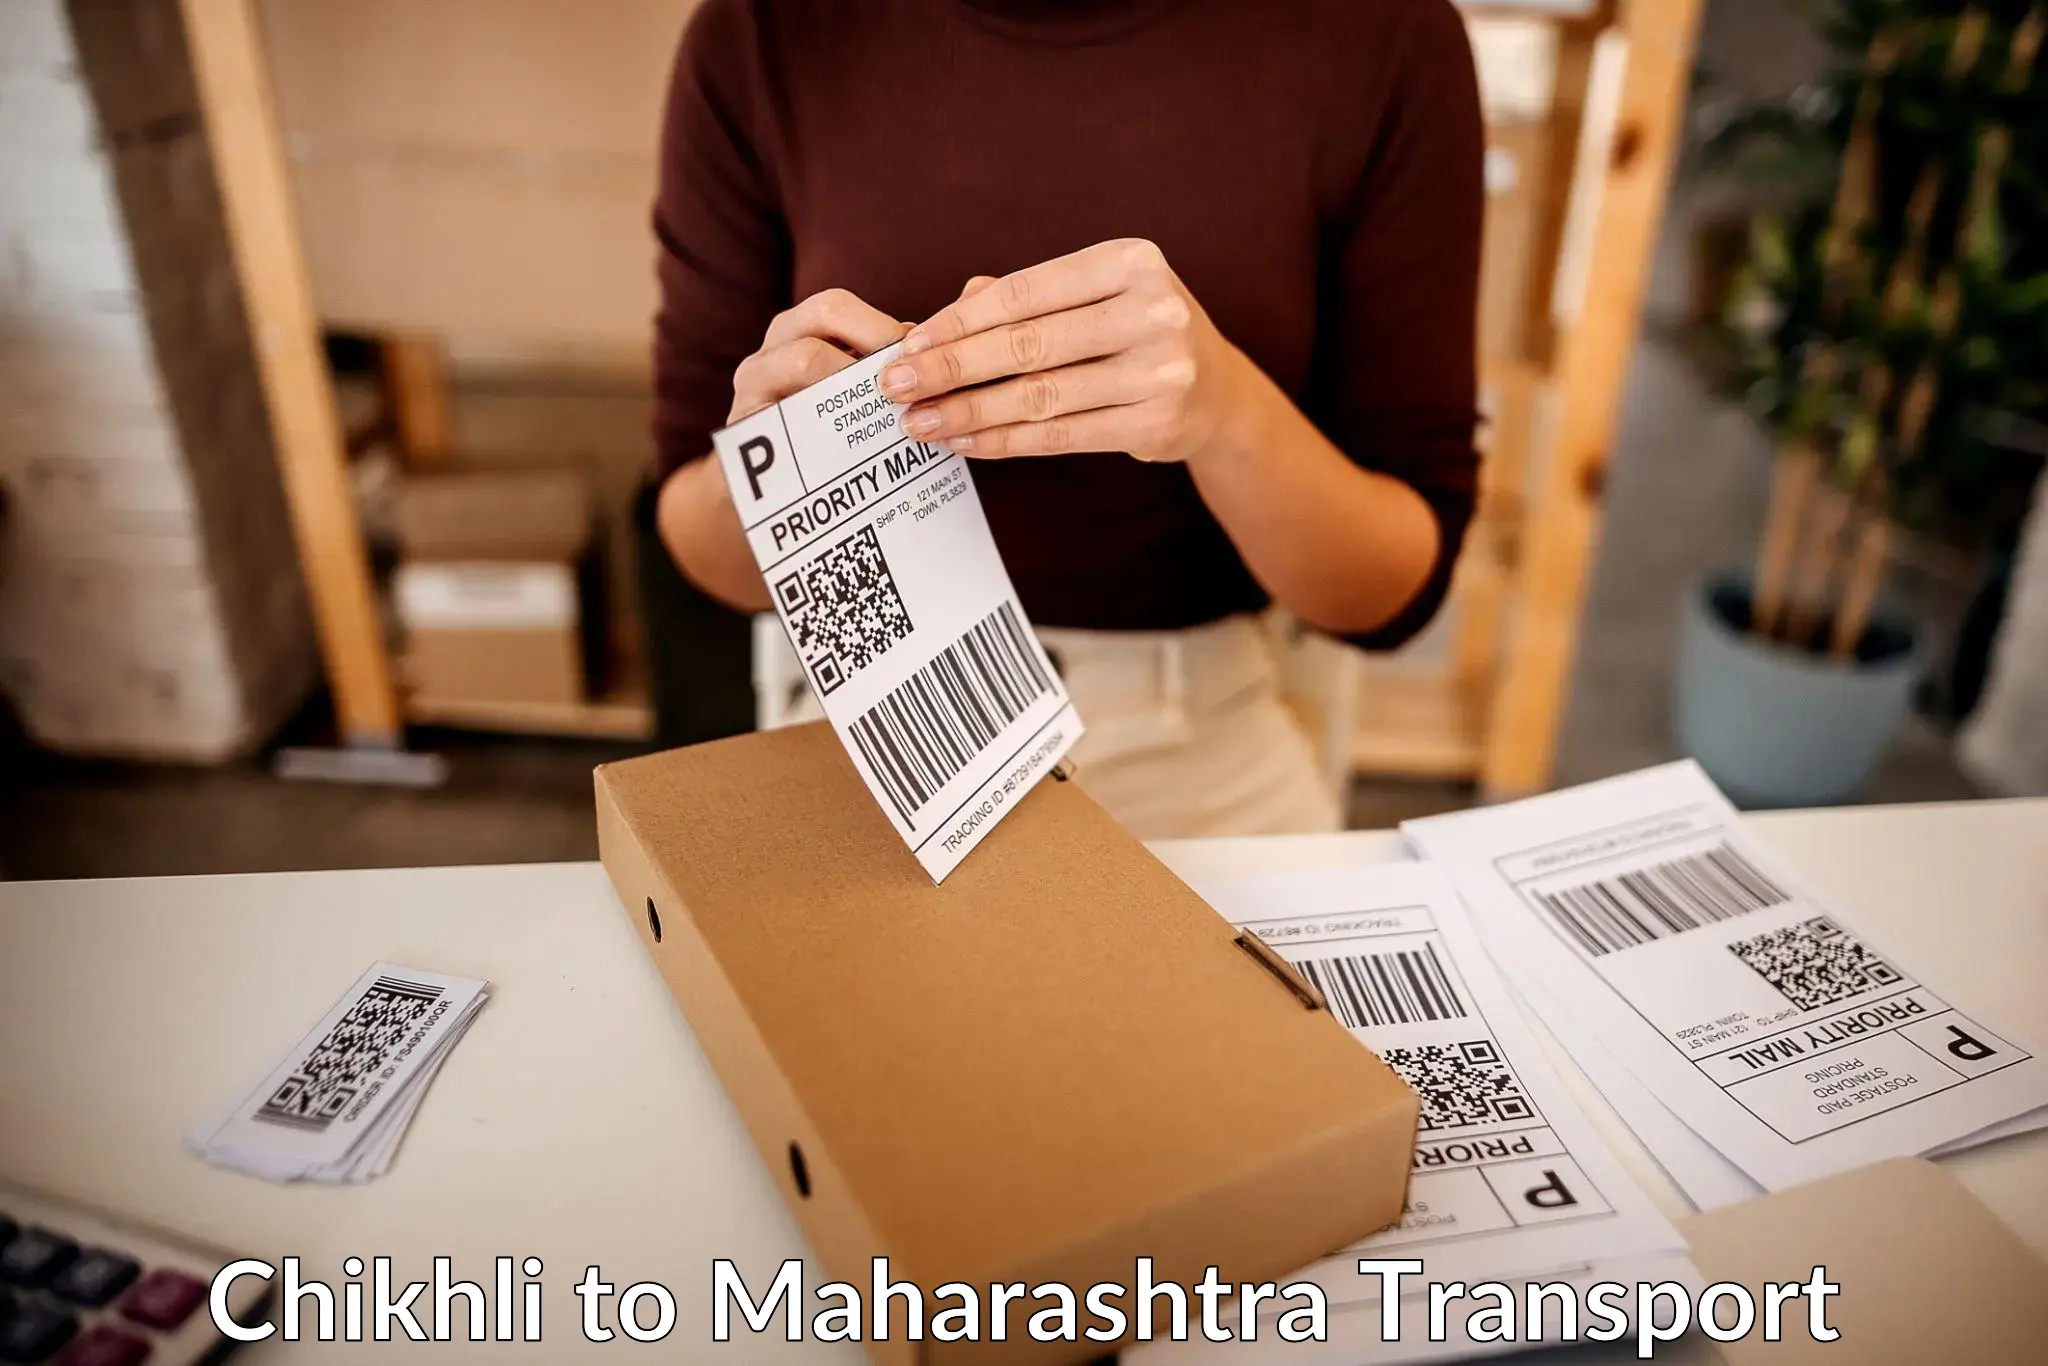 Air freight transport services Chikhli to Parner